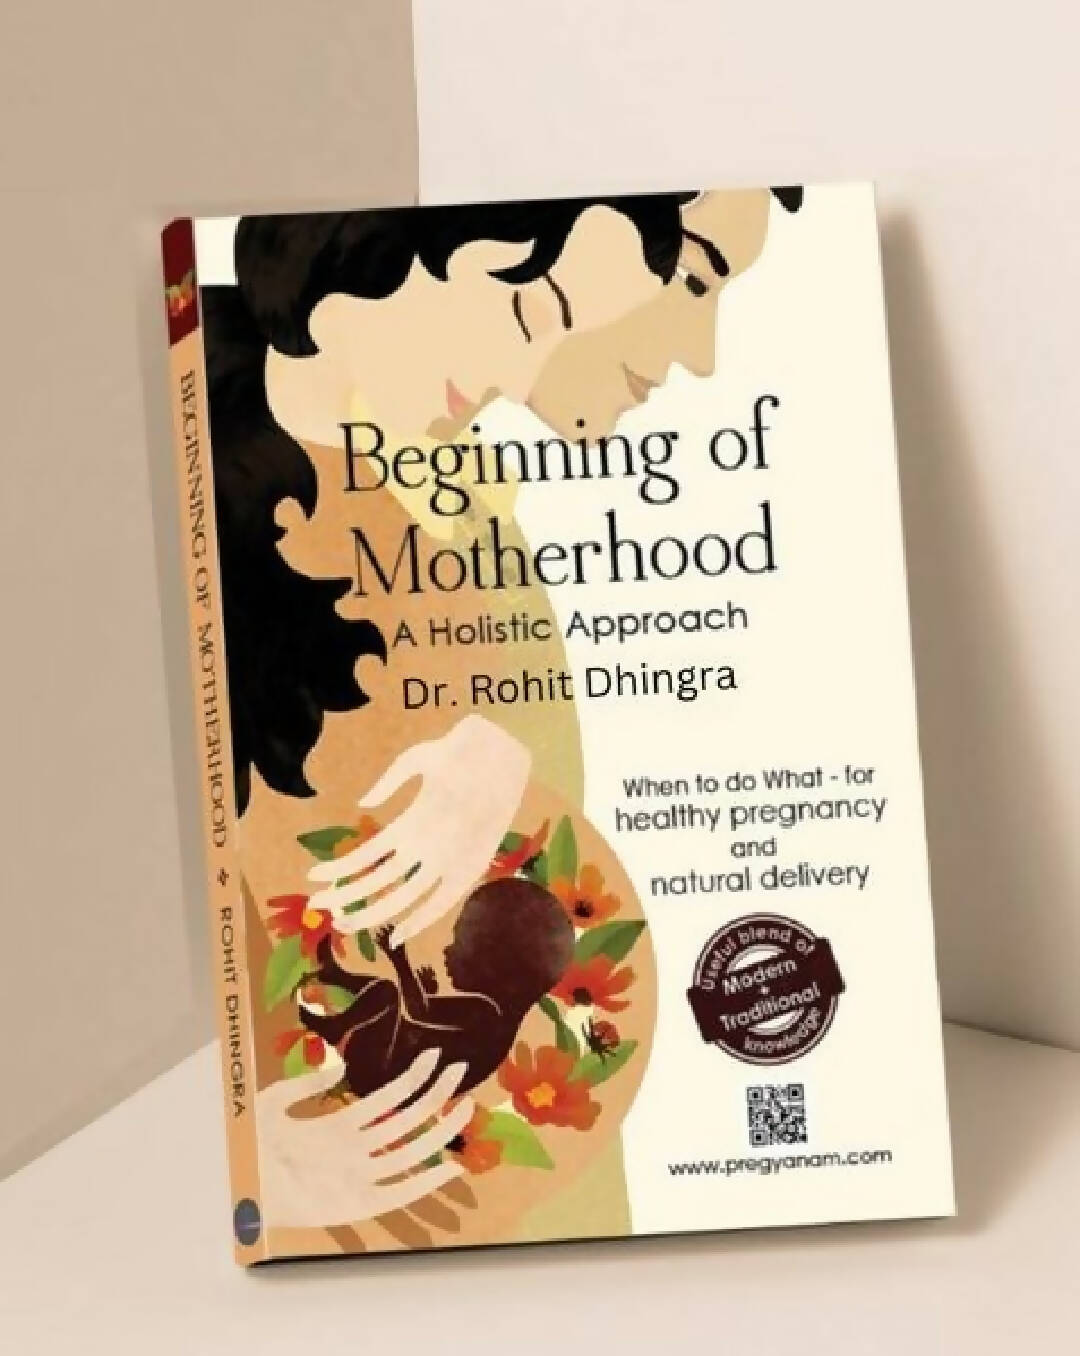 Best Guide on Pregnancy & Post-Delivery "Beginning of Motherhood"|Garbh Sanskar|Healthy Pregnancy&Natural Delivery book for expecting Mothers|Delivery Planning|Father's guide|Mental Health|2nd Version|Hardcover